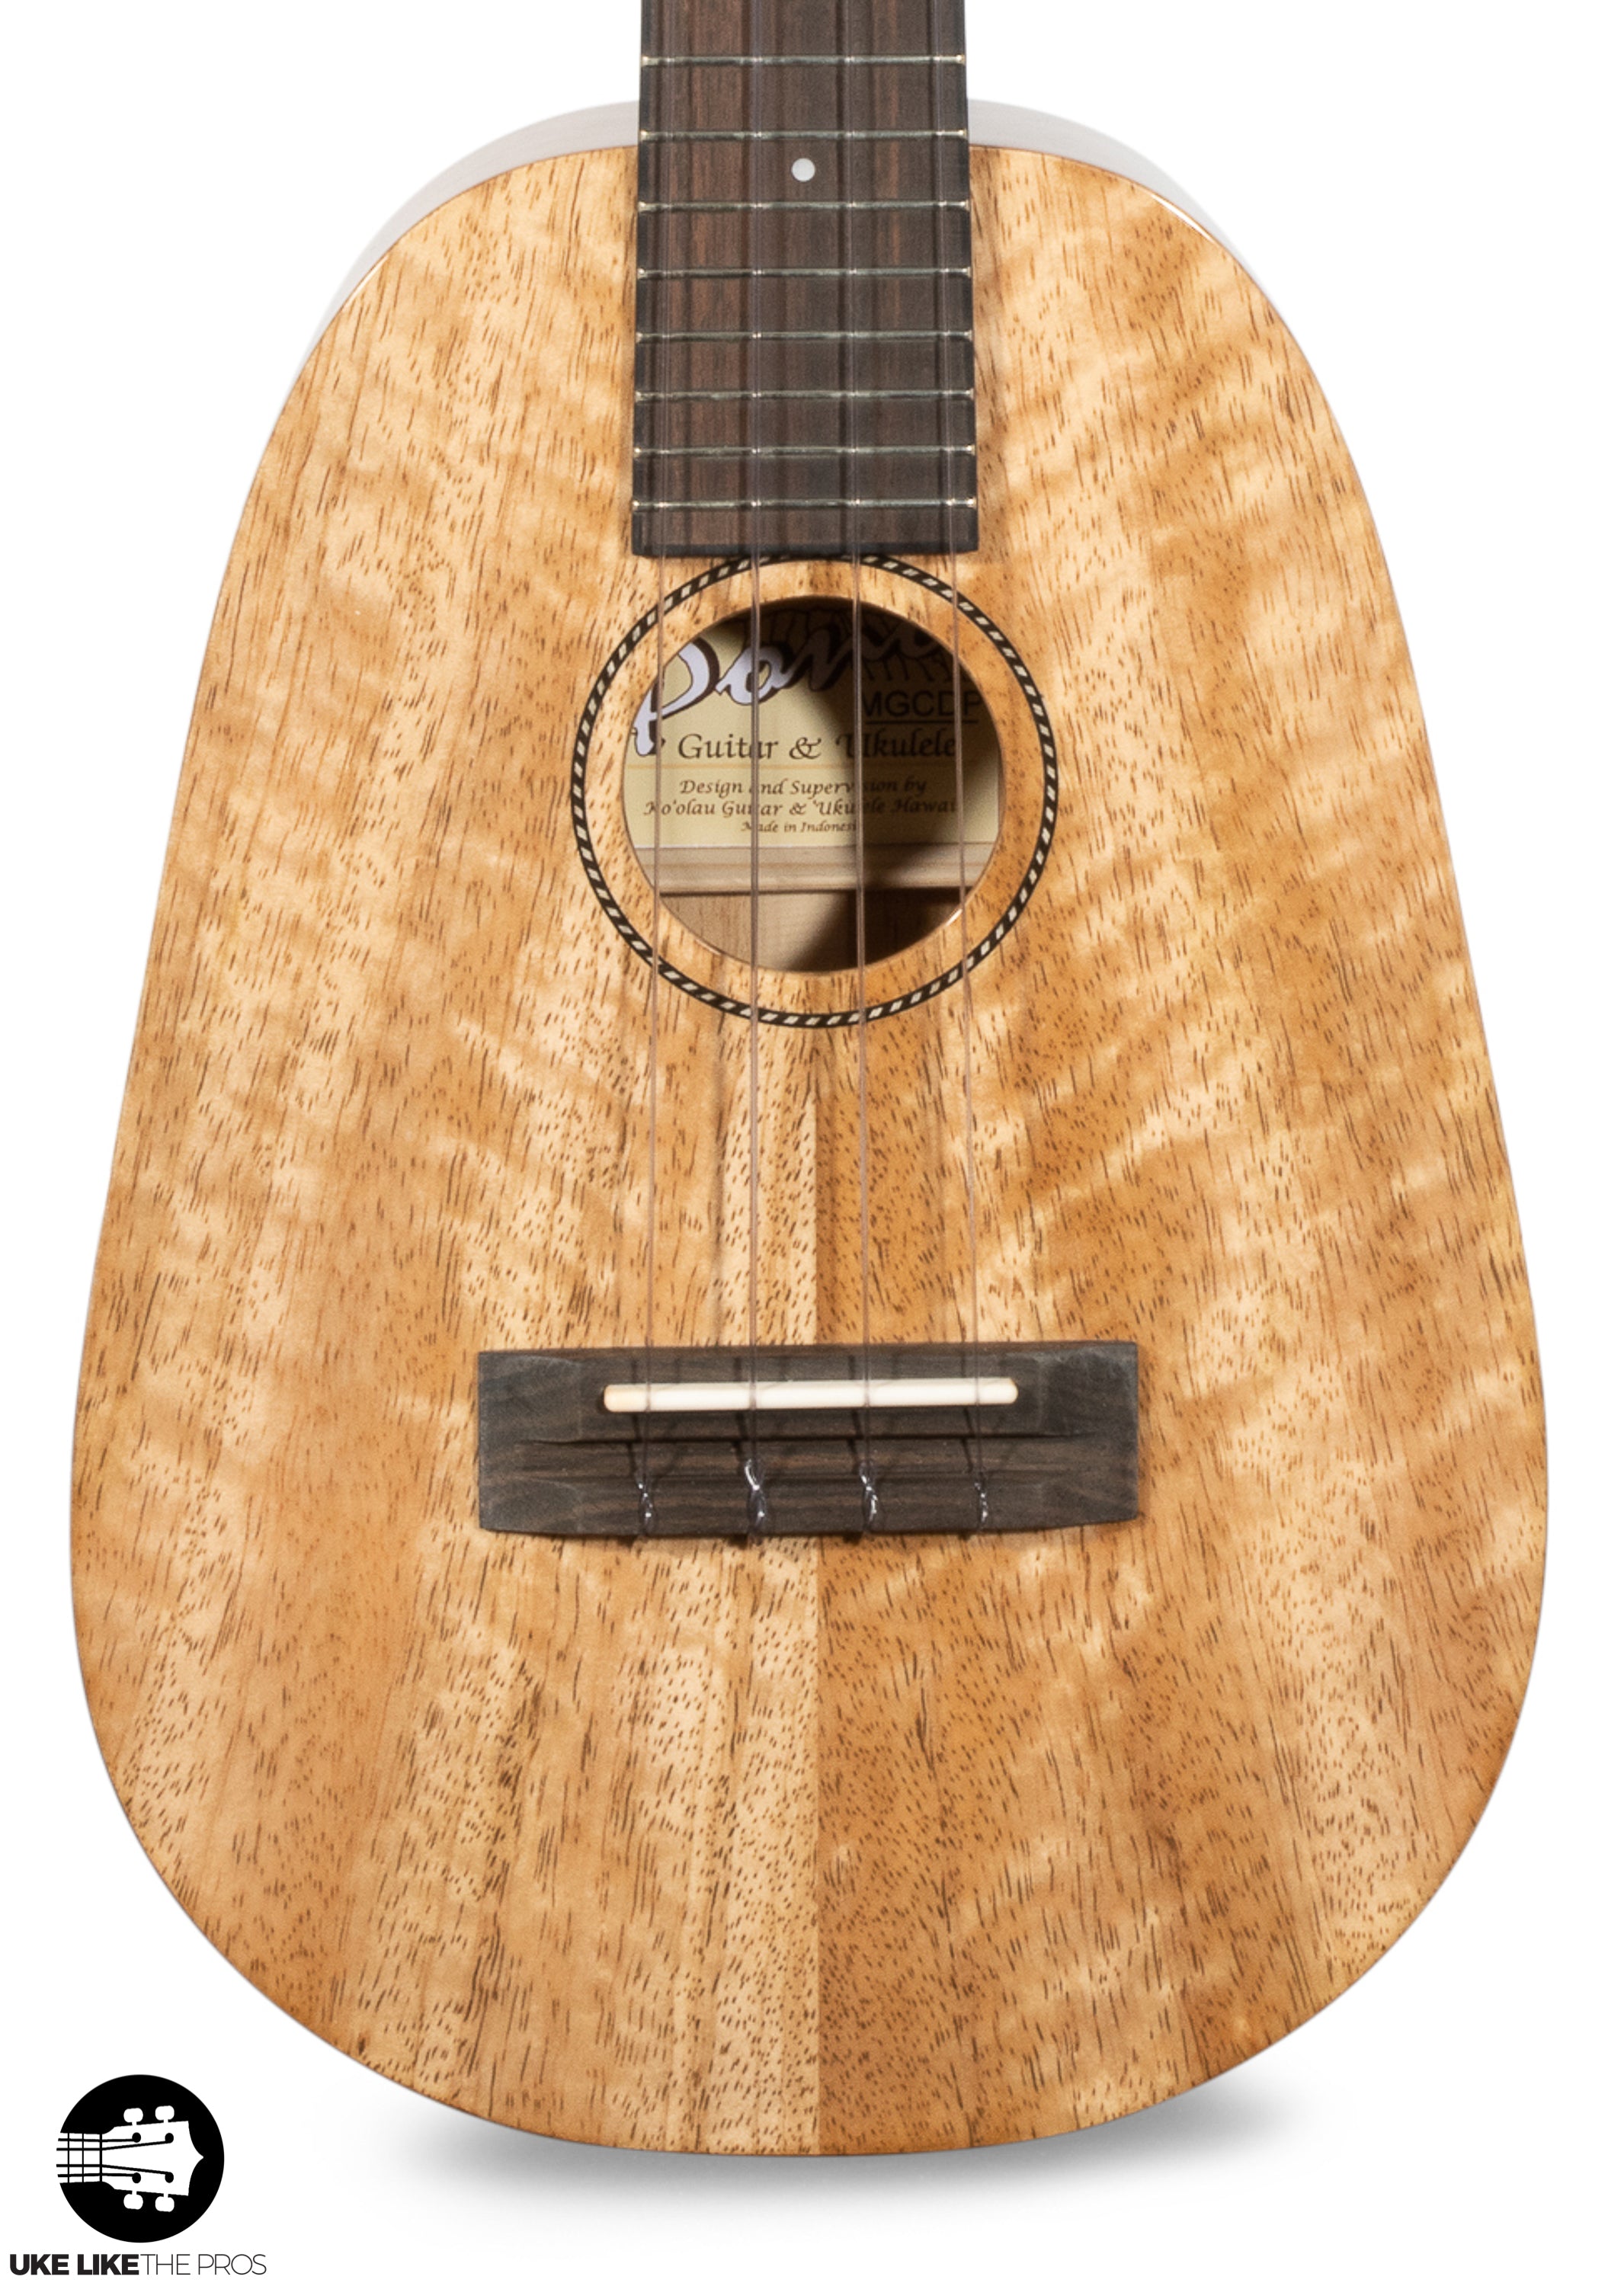 Pono MGCDP Deluxe Pineapple Concert Ukulele All Solid Mango "Olly"